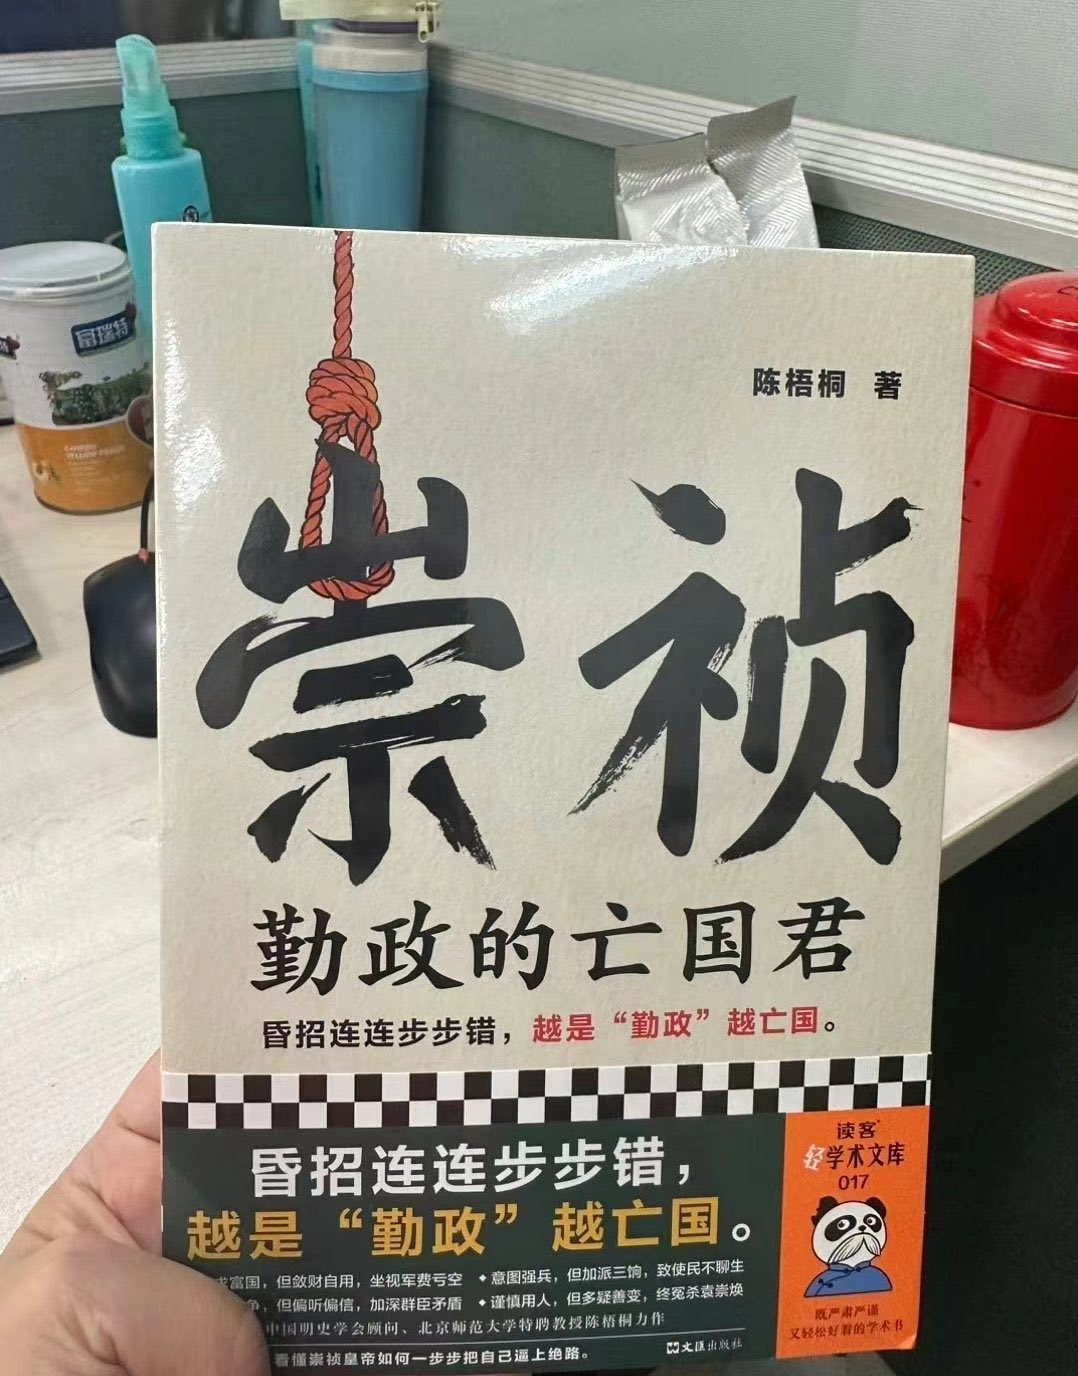 An eye-catching black, white, tan, and red book cover features bold calligraphy, evocative quotations, and an image of a noose wrapped around the first character in Chongzhen’s name.